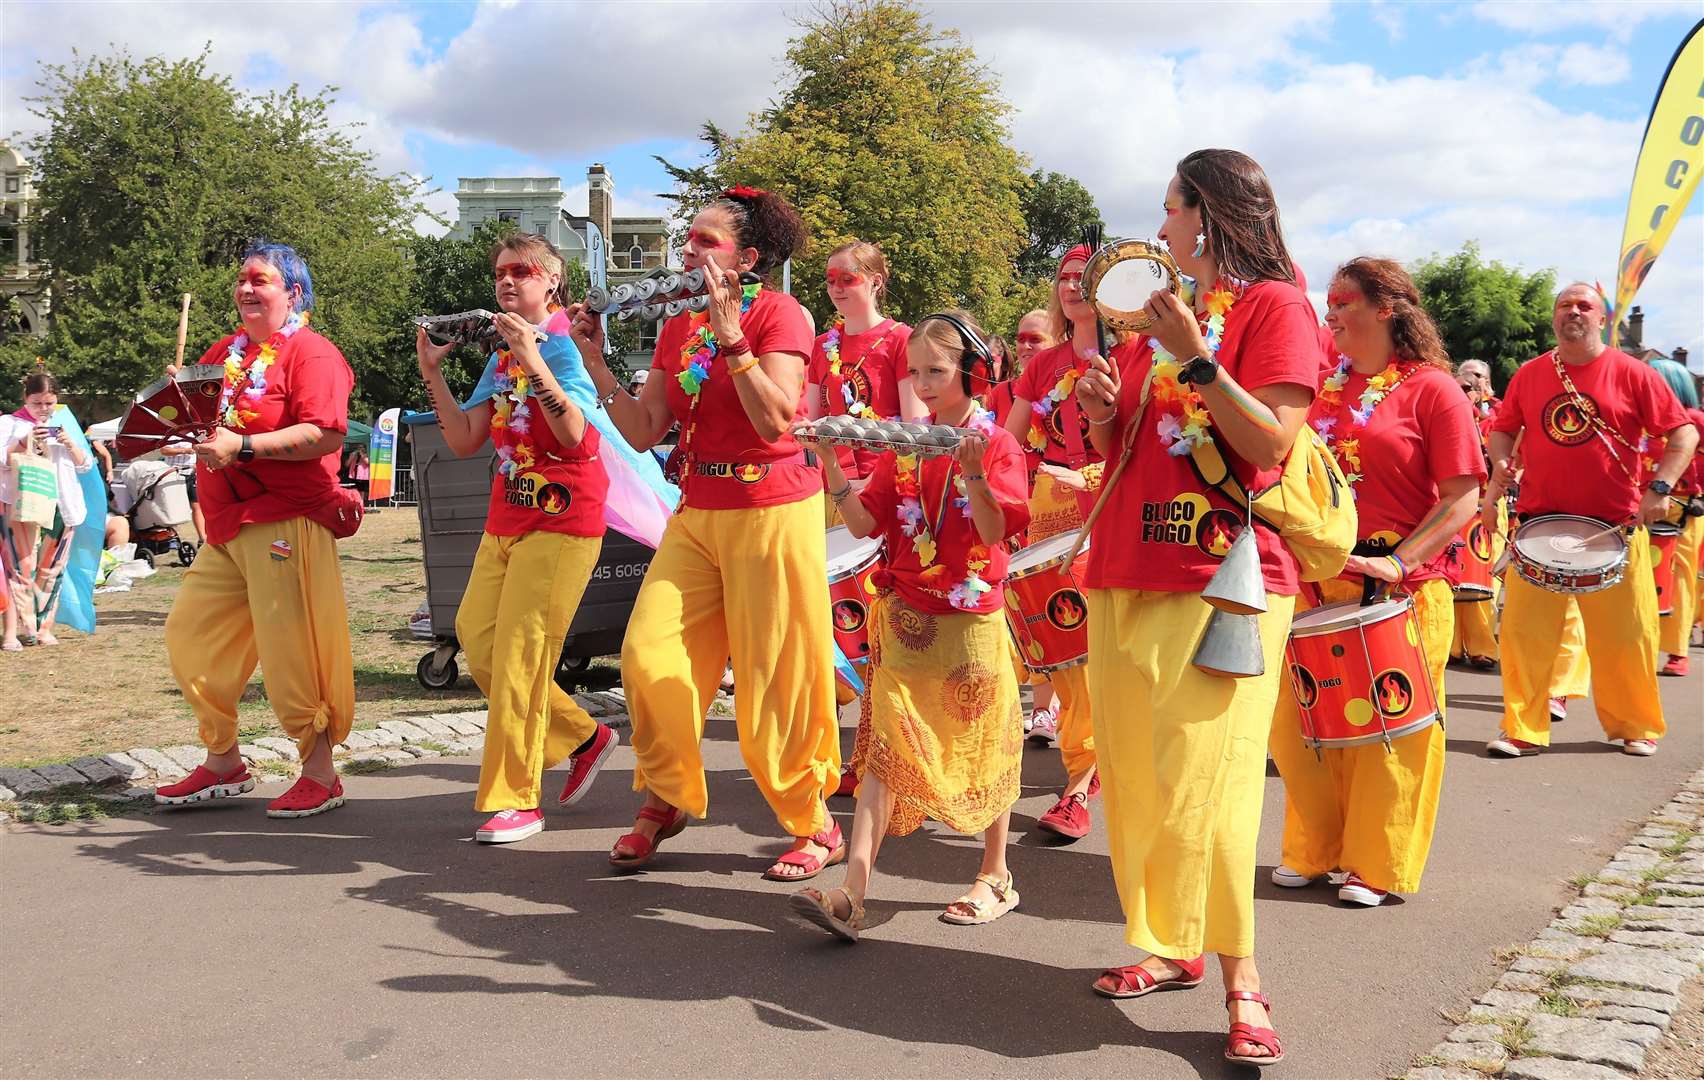 Bloco Fogo Samba Band took part in the parade. Picture: Rachel Evans